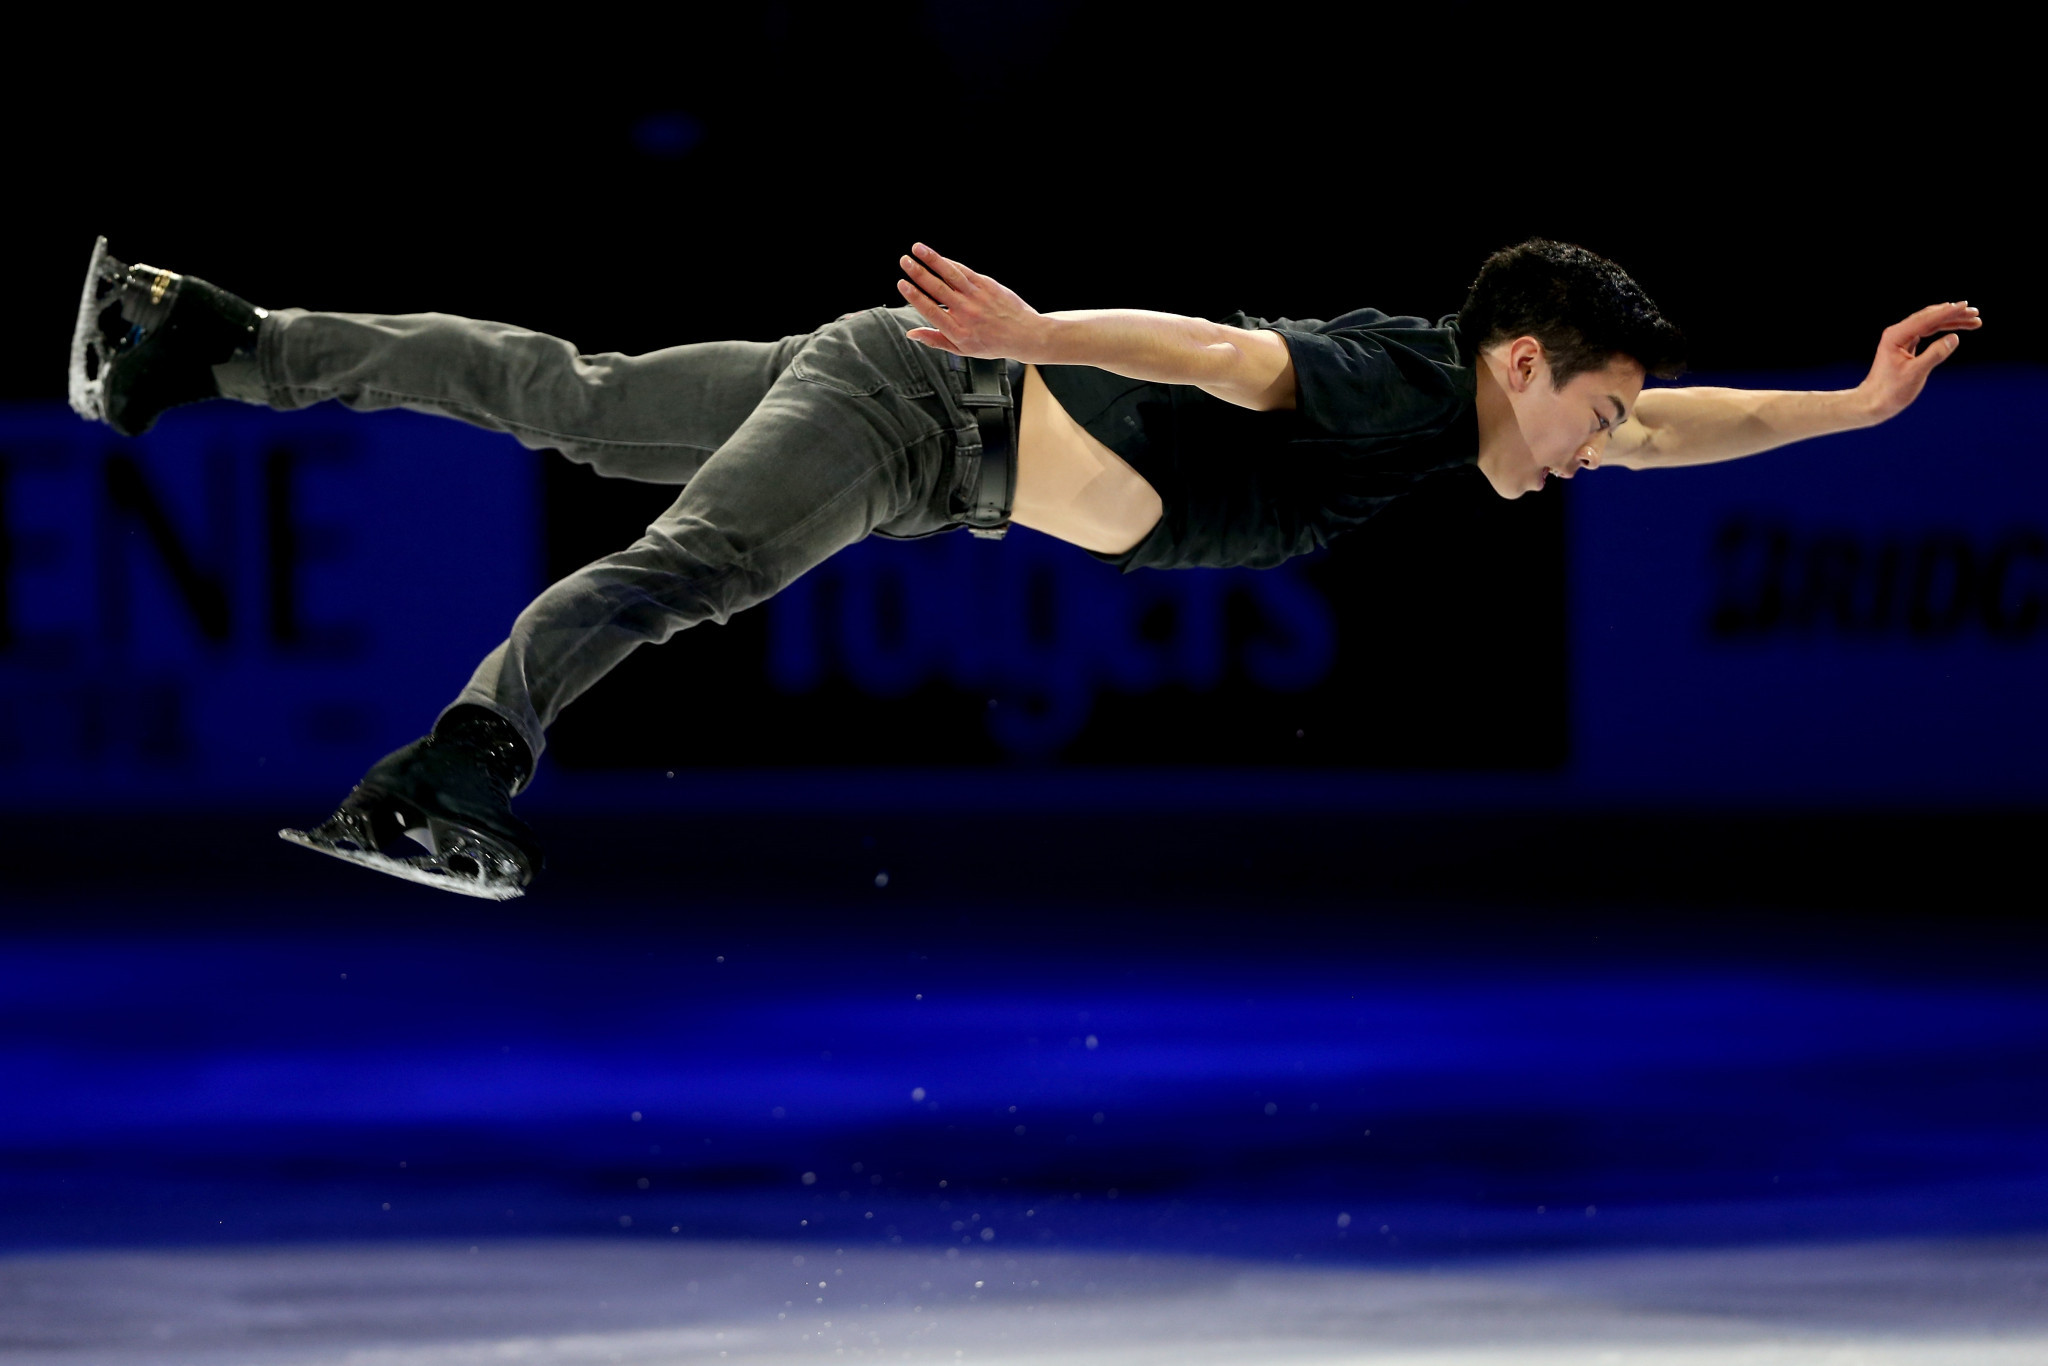 ISU to consider limiting quad jumps in free skate programmes